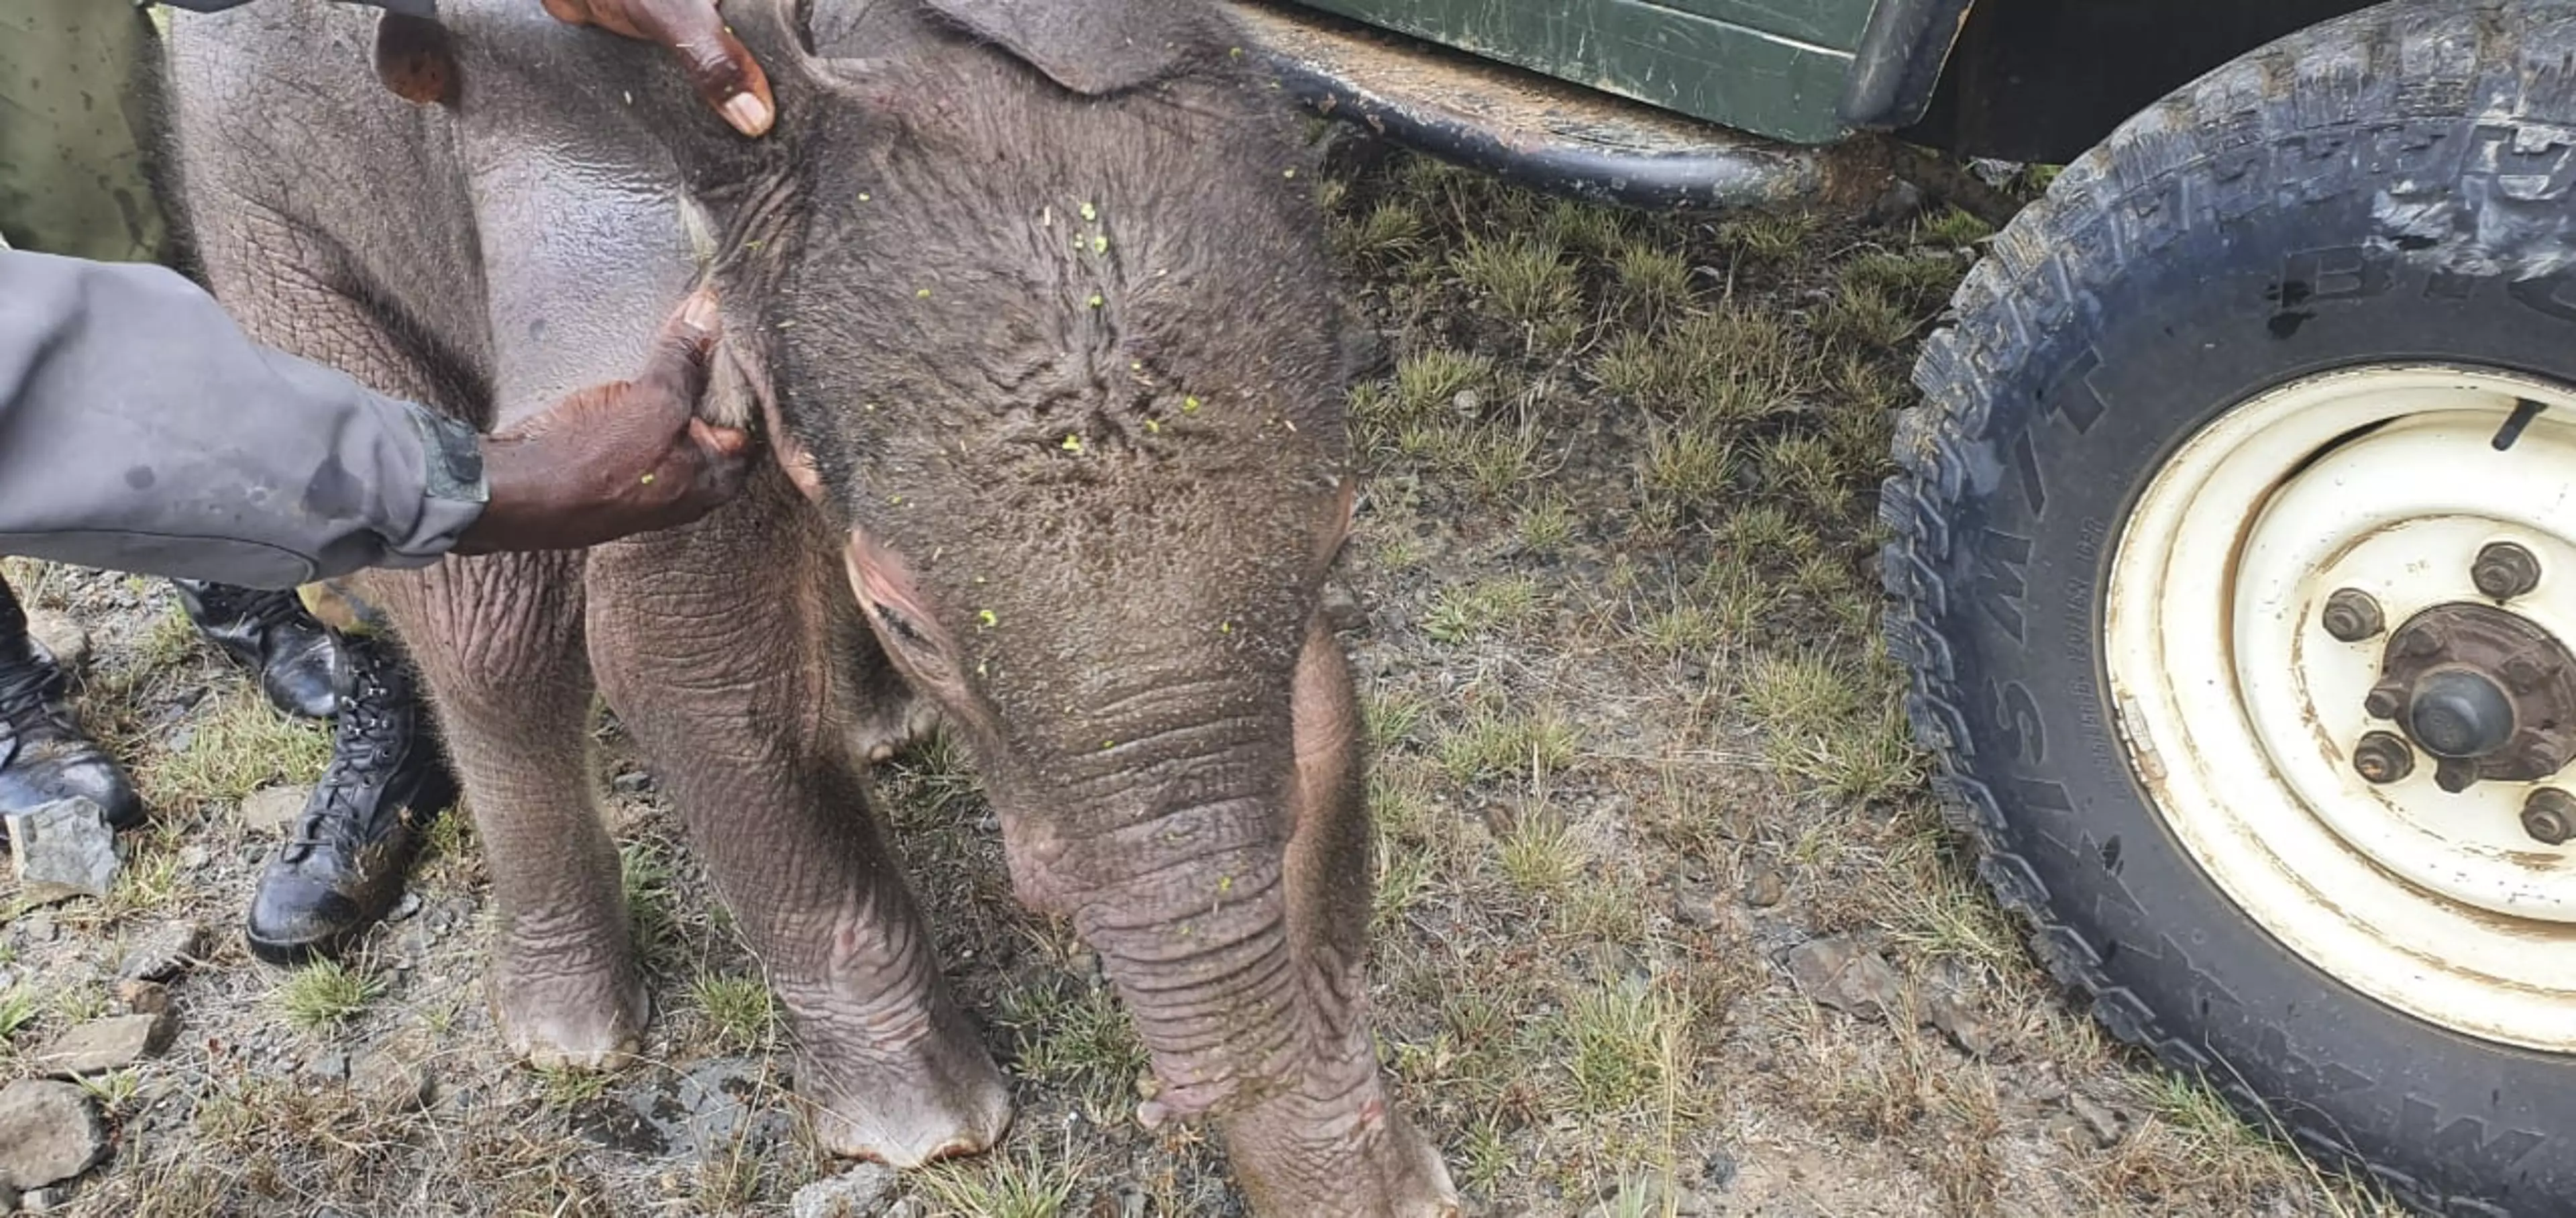 The elephant was rescued by an orphanage.